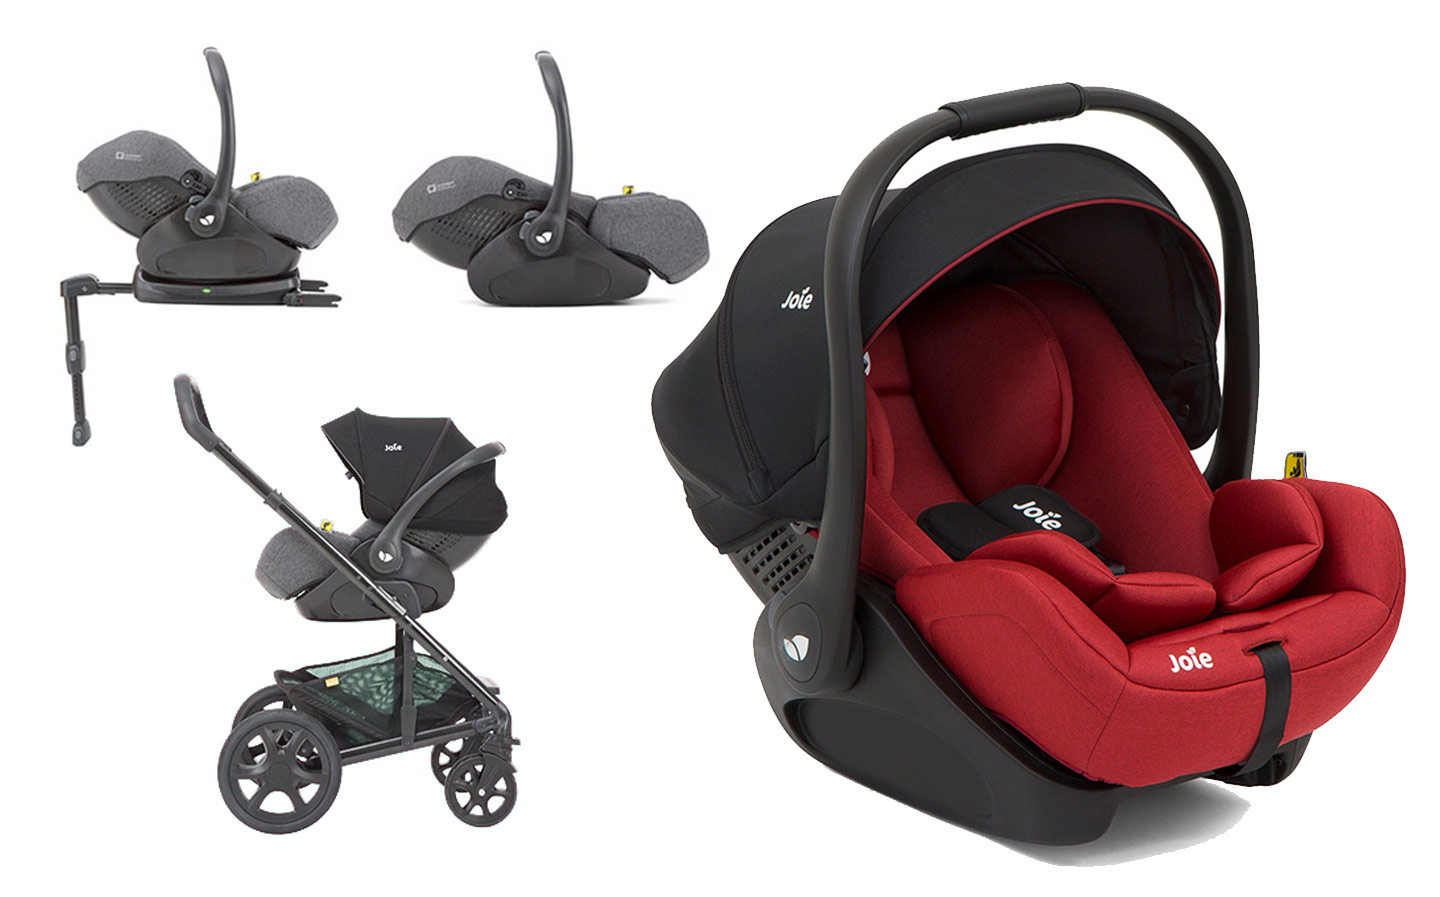 Joie i-Level child seat review